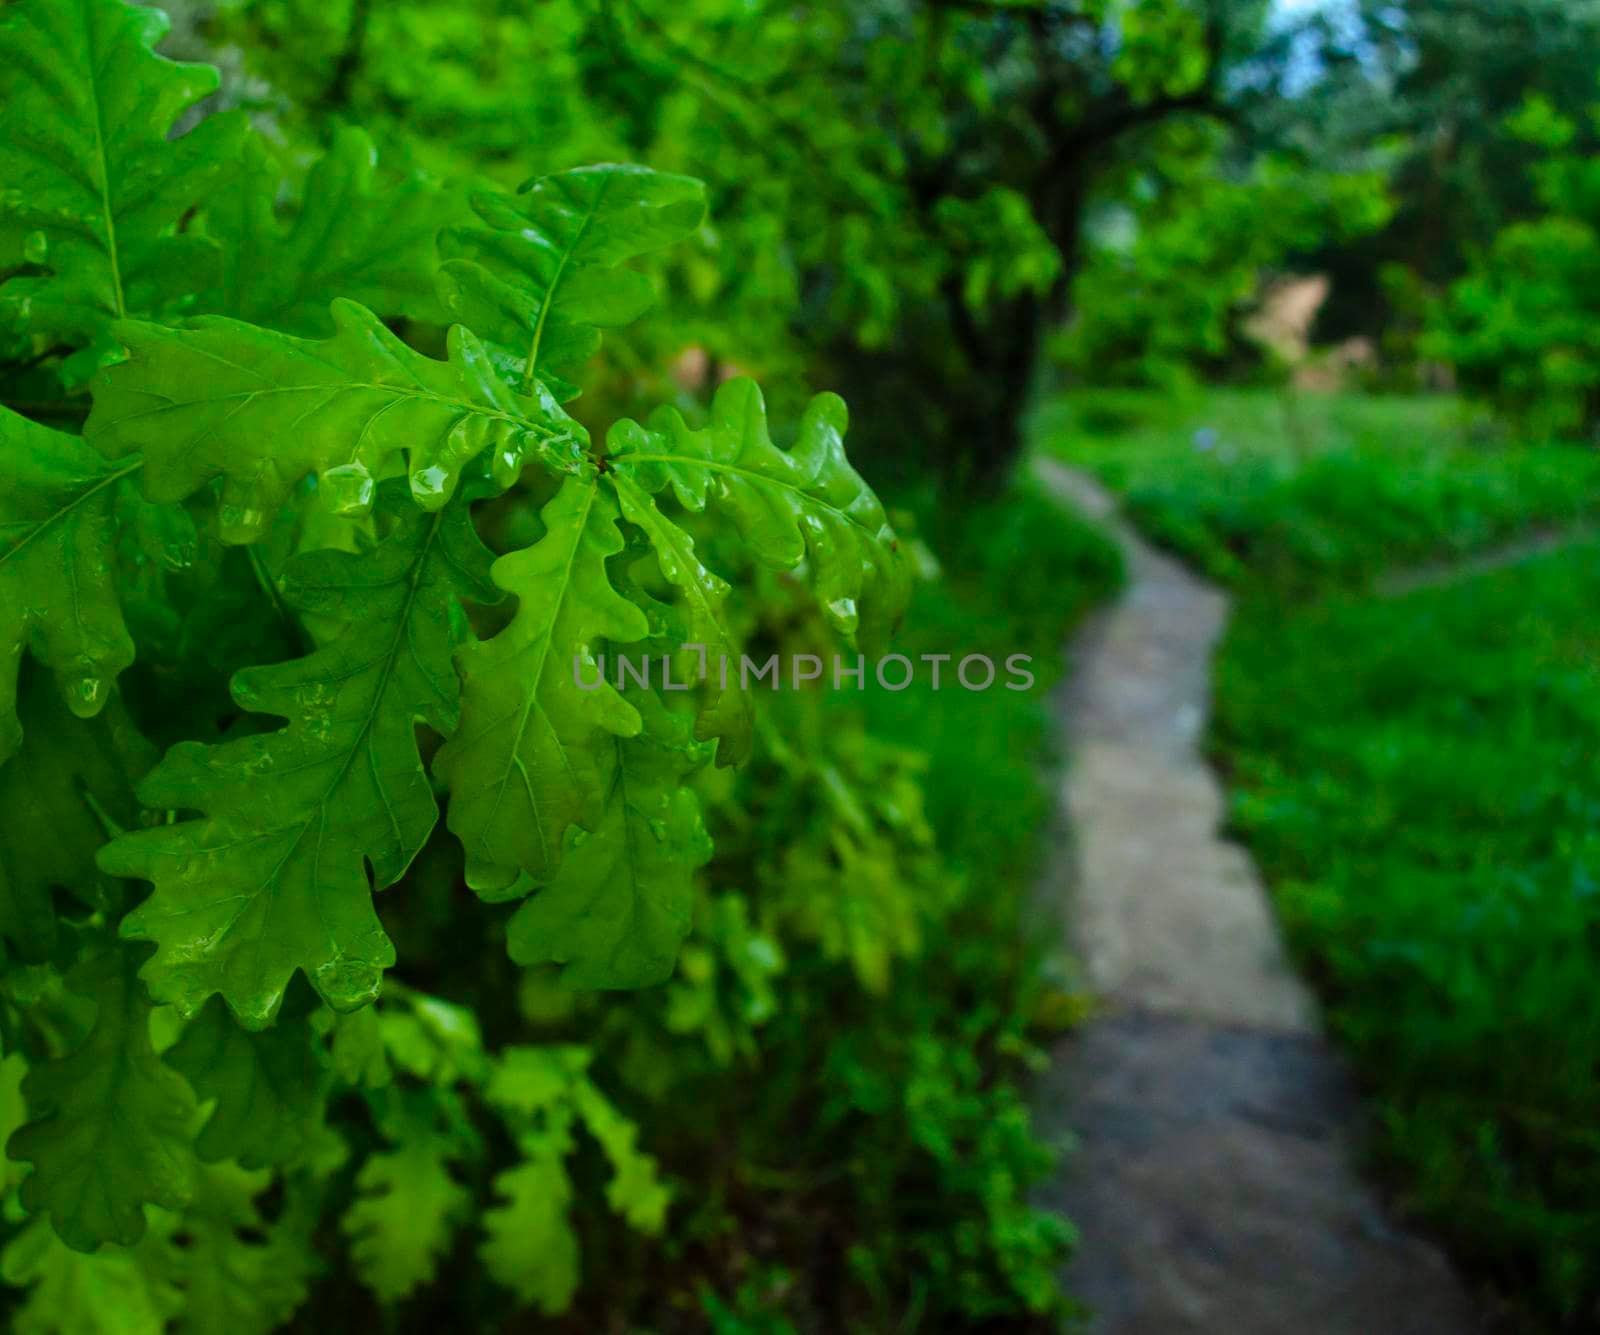 Oak leaves in drops of rain. Spring evening landscape with a path in the garden. The smell of freshness and greenery by mtx